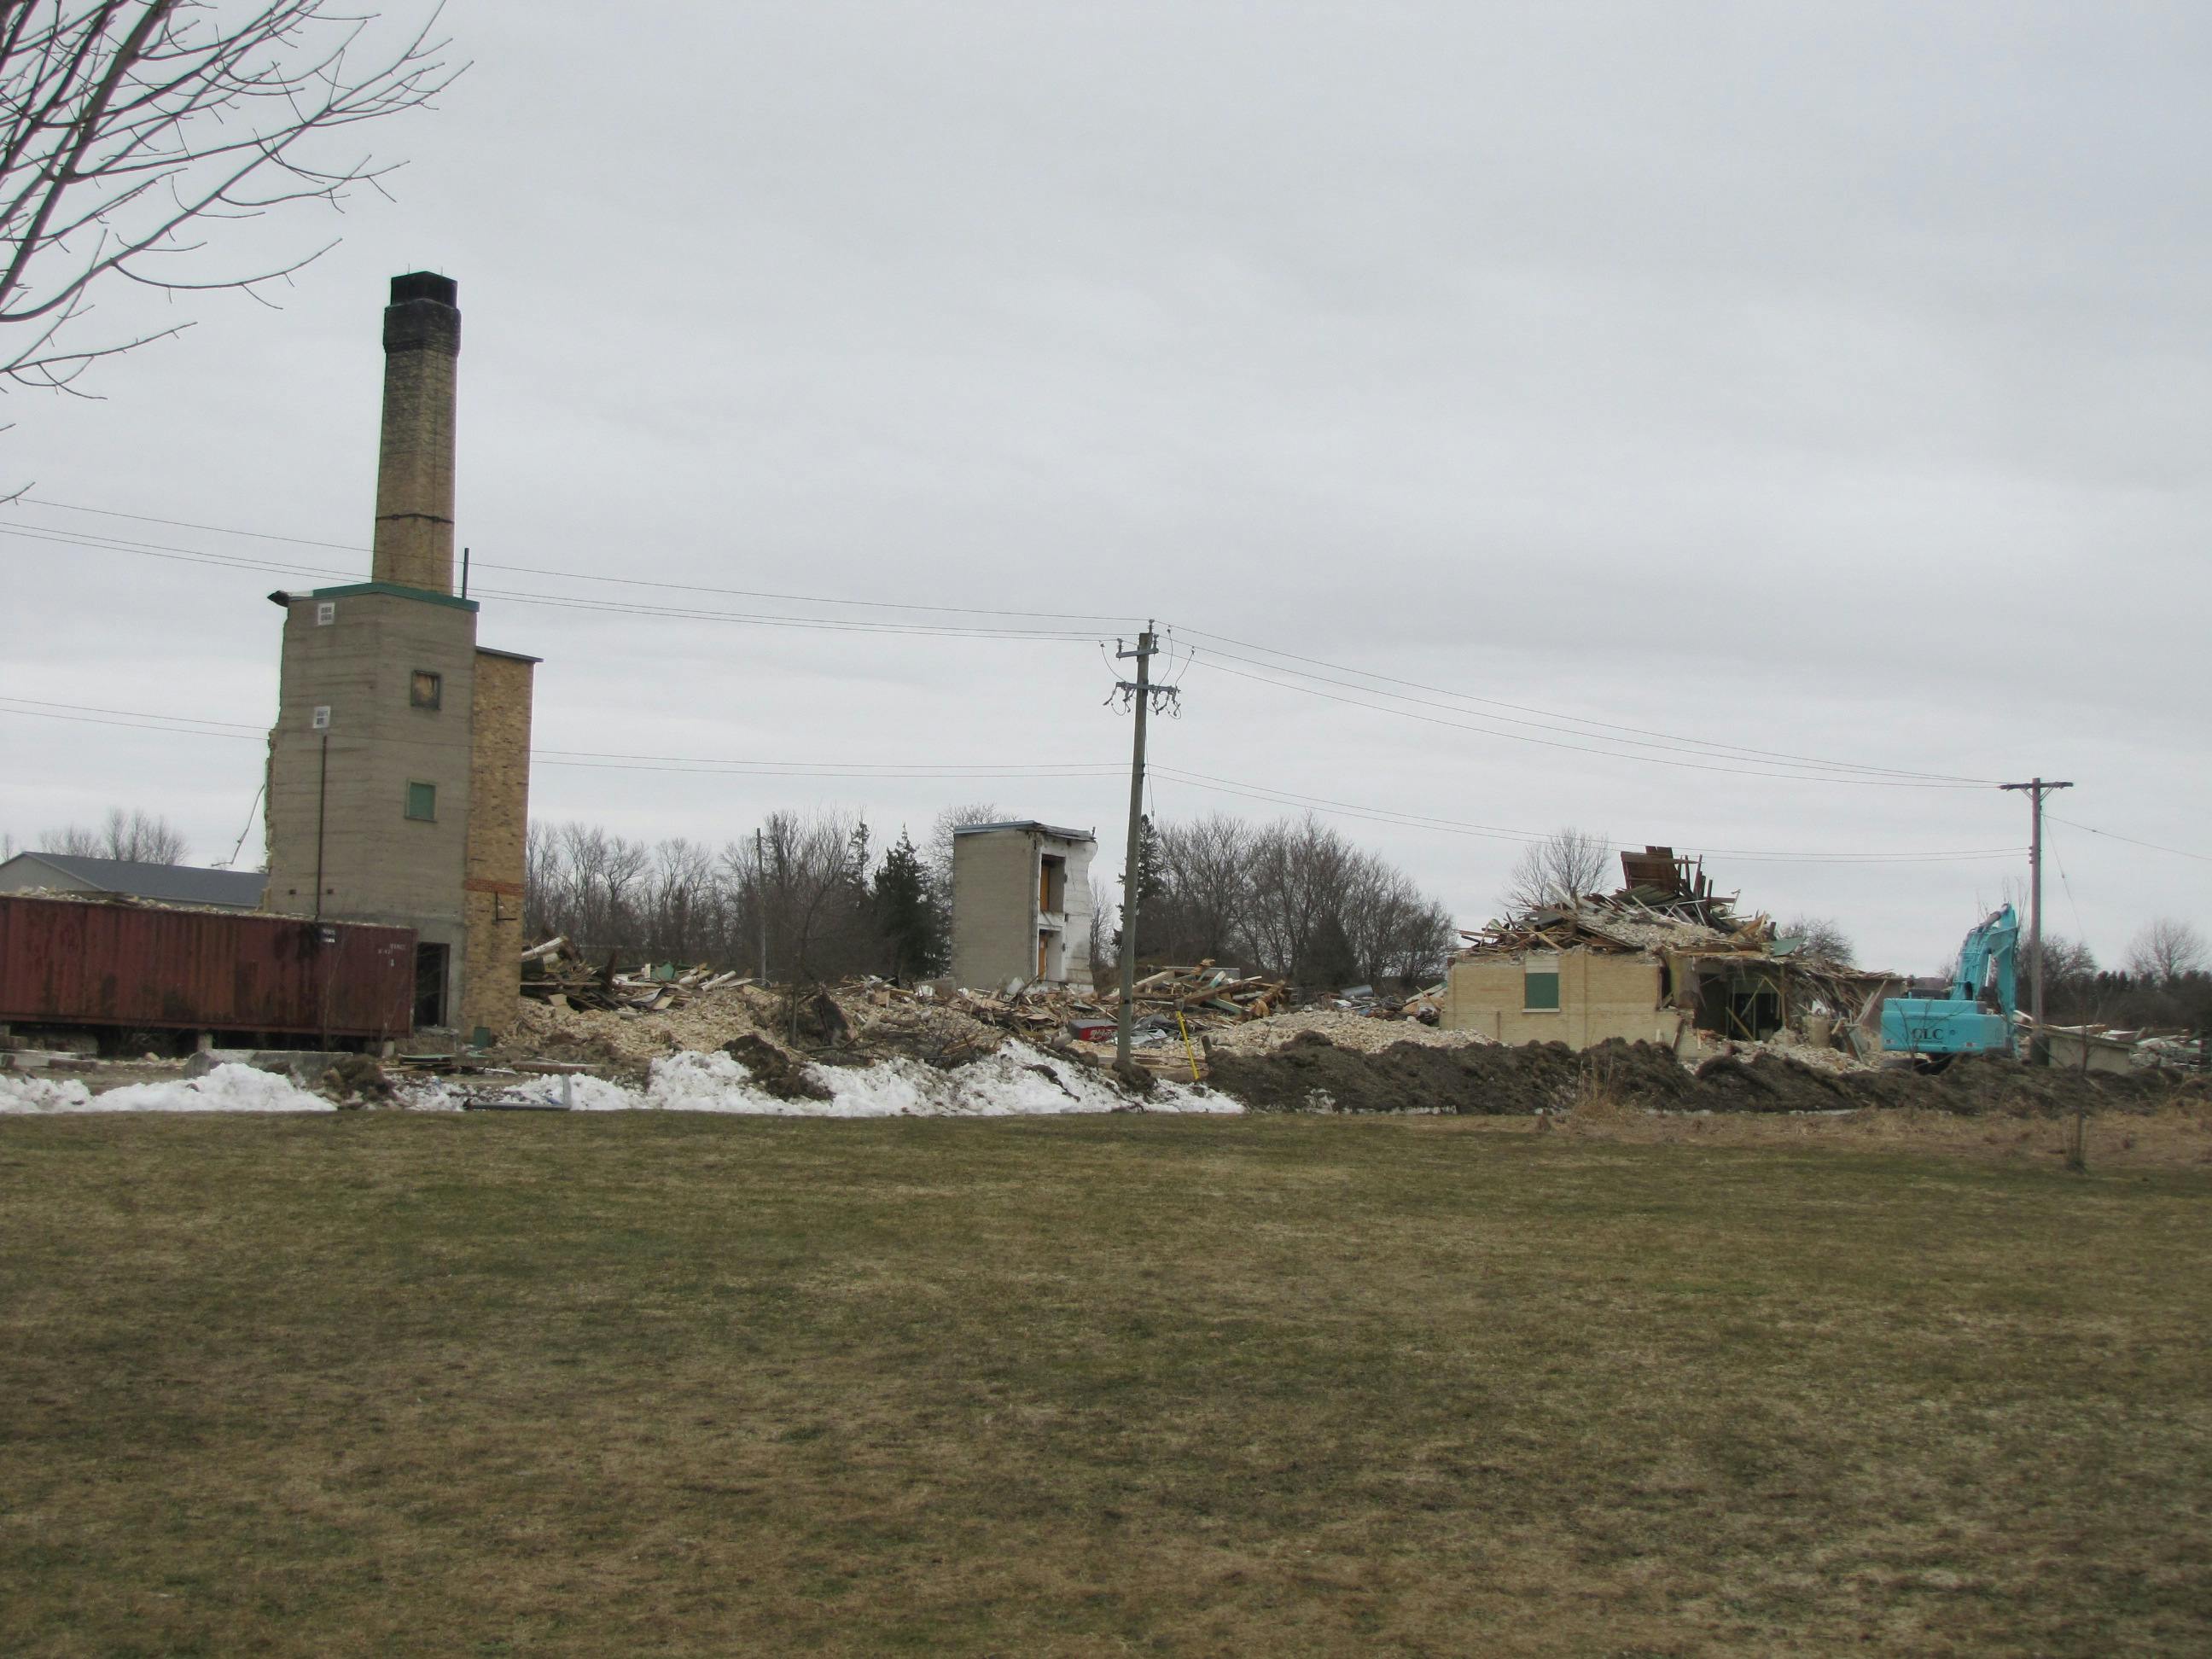 Demolition of Bogdon and Gross - March 16, 2021